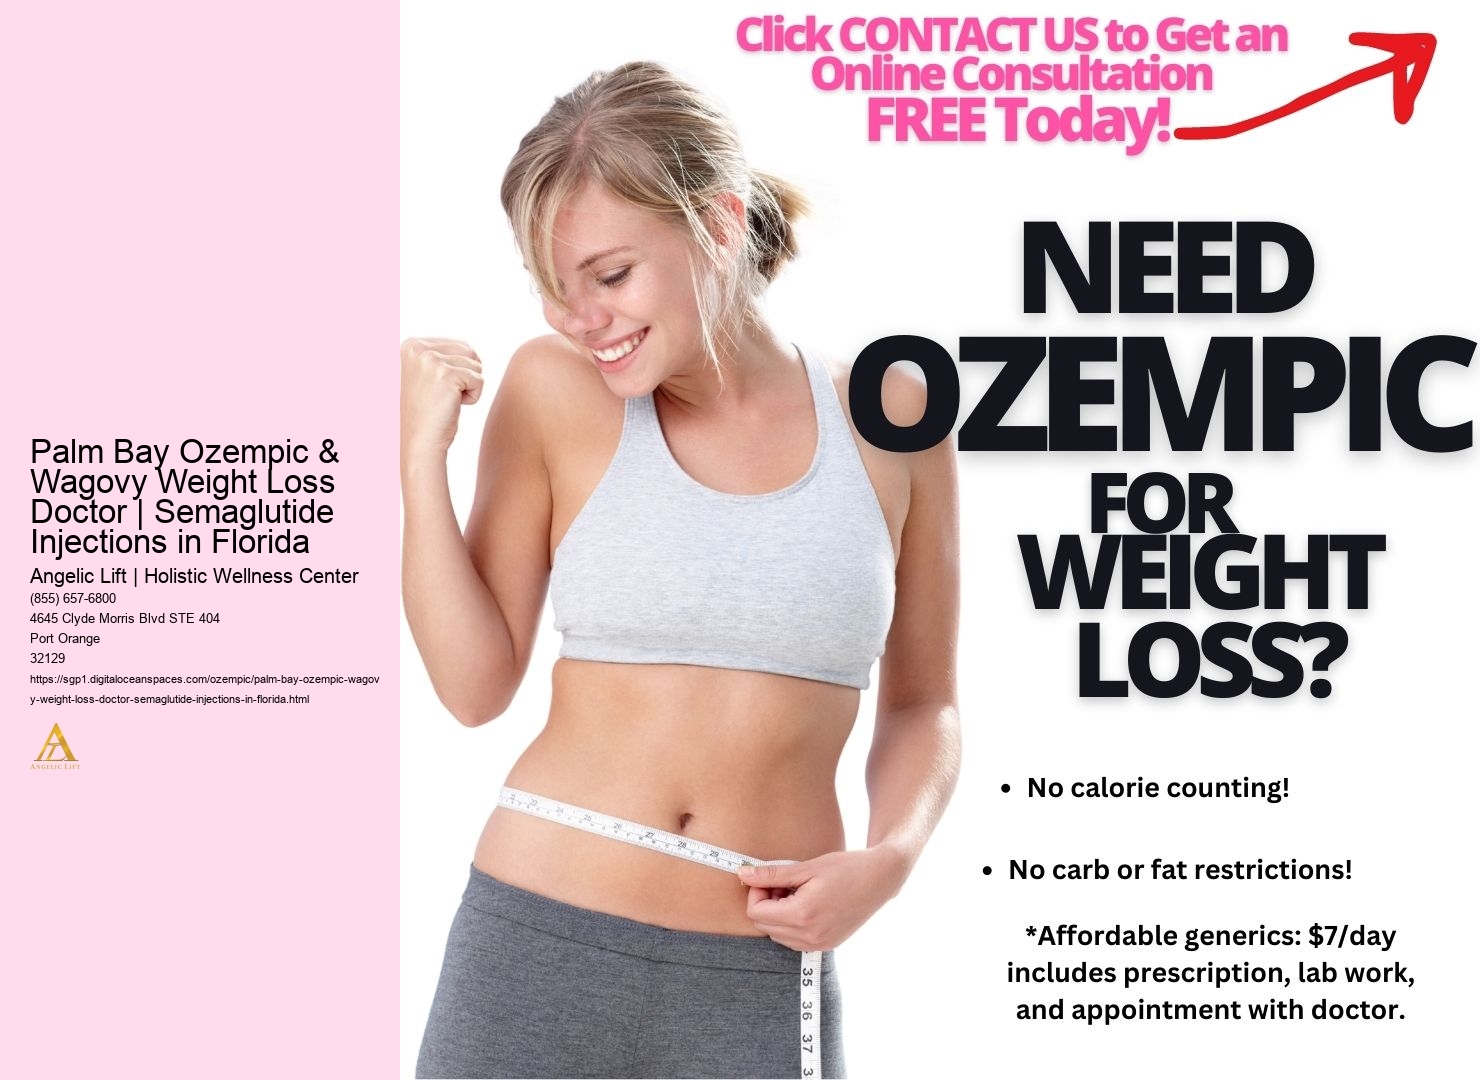 Palm Bay Ozempic & Wagovy Weight Loss Doctor | Semaglutide Injections in Florida